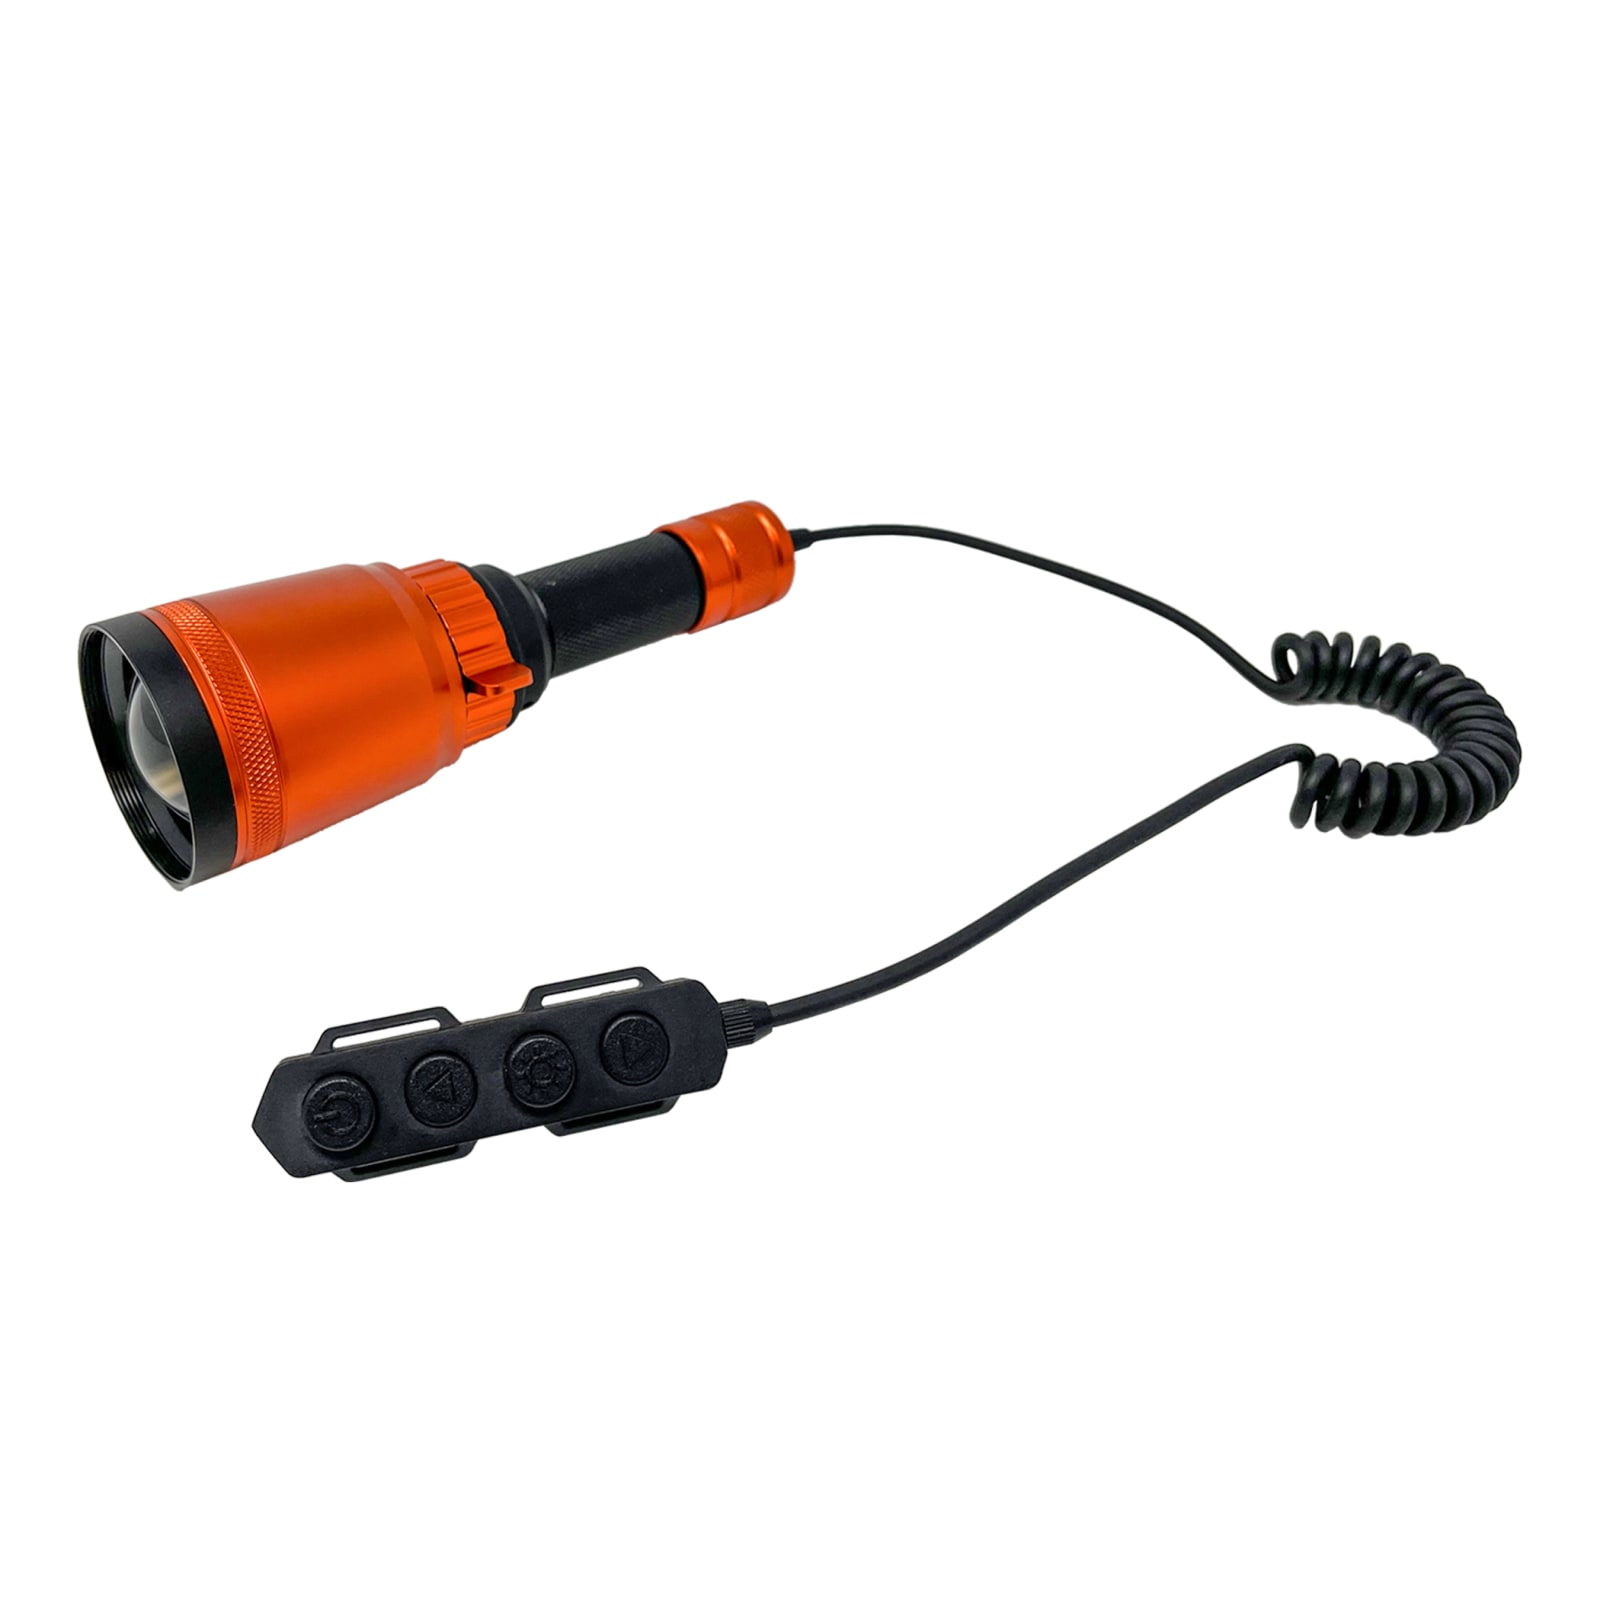 BOWFIRE Bow Fishing Light by Foxpro at Fleet Farm